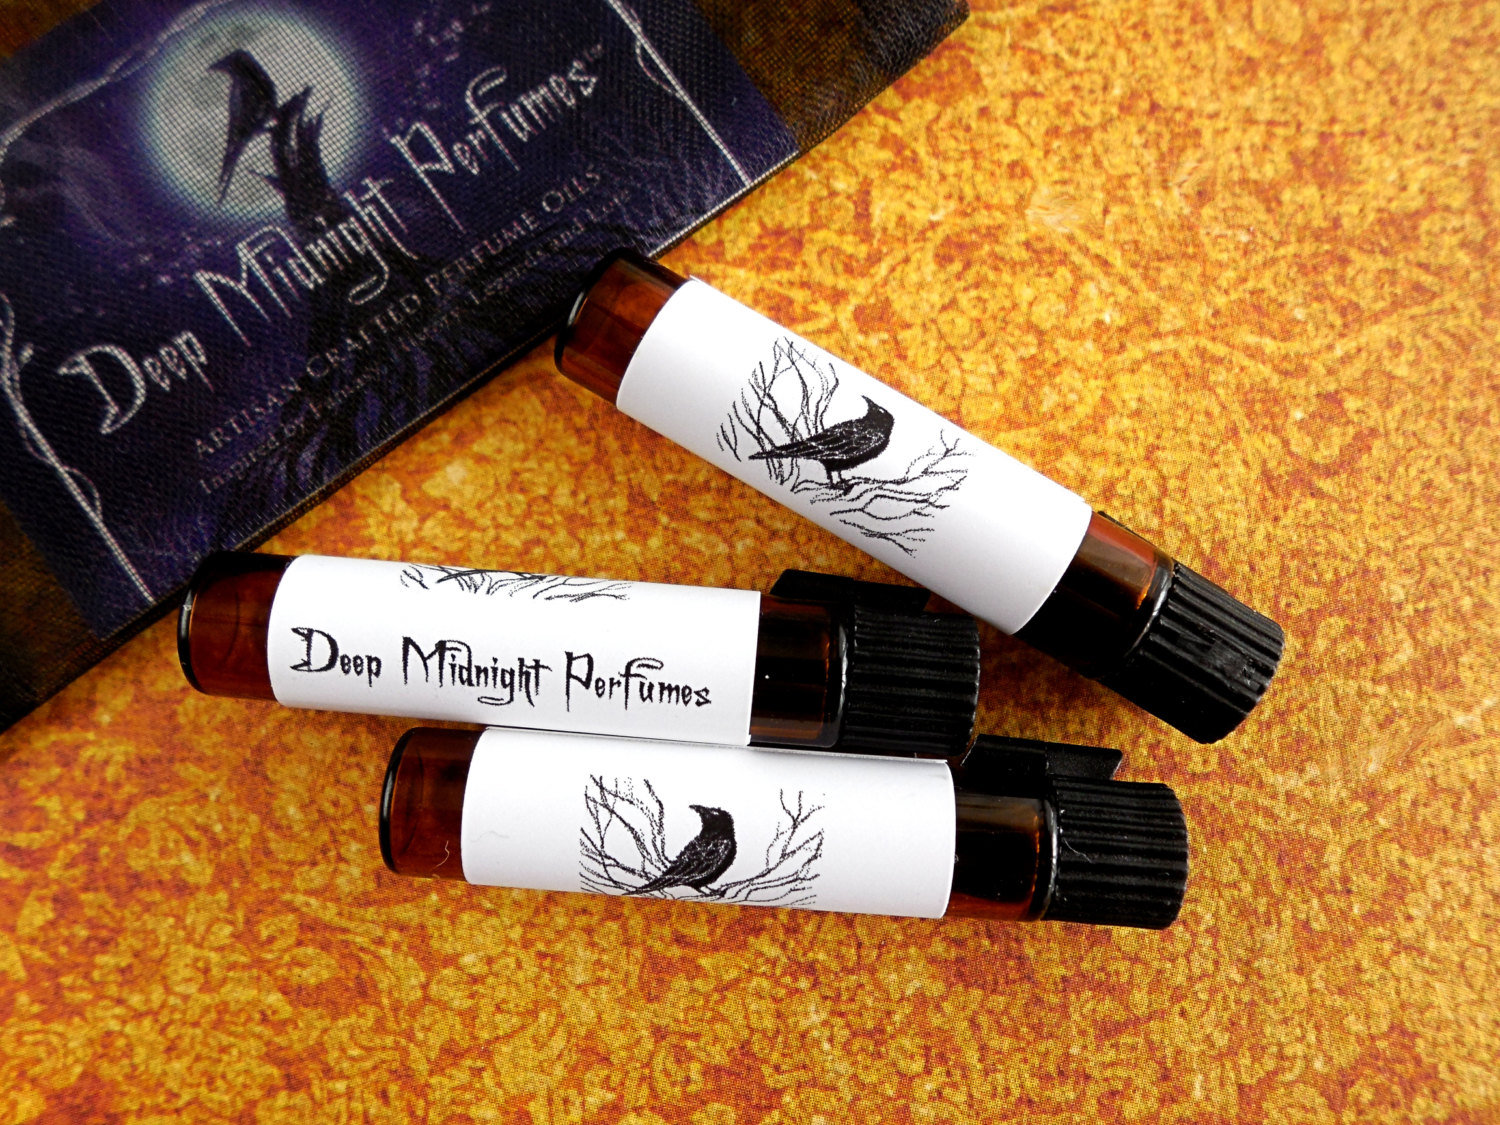 PERFUME SAMPLES by Deep Midnight Perfumes, CHOOSE Your Own Sampler Set of 3 Vials